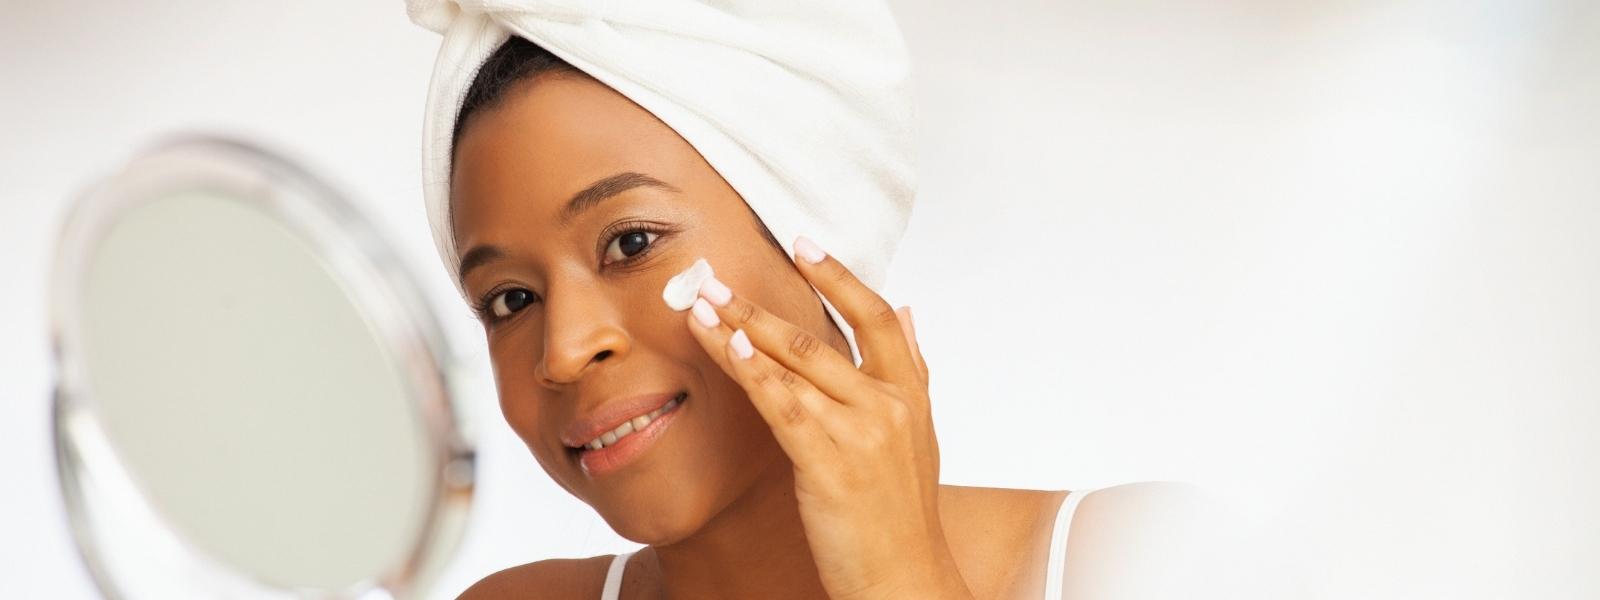 Woman applying skincare with towel on head and mirror in background ishga skincare